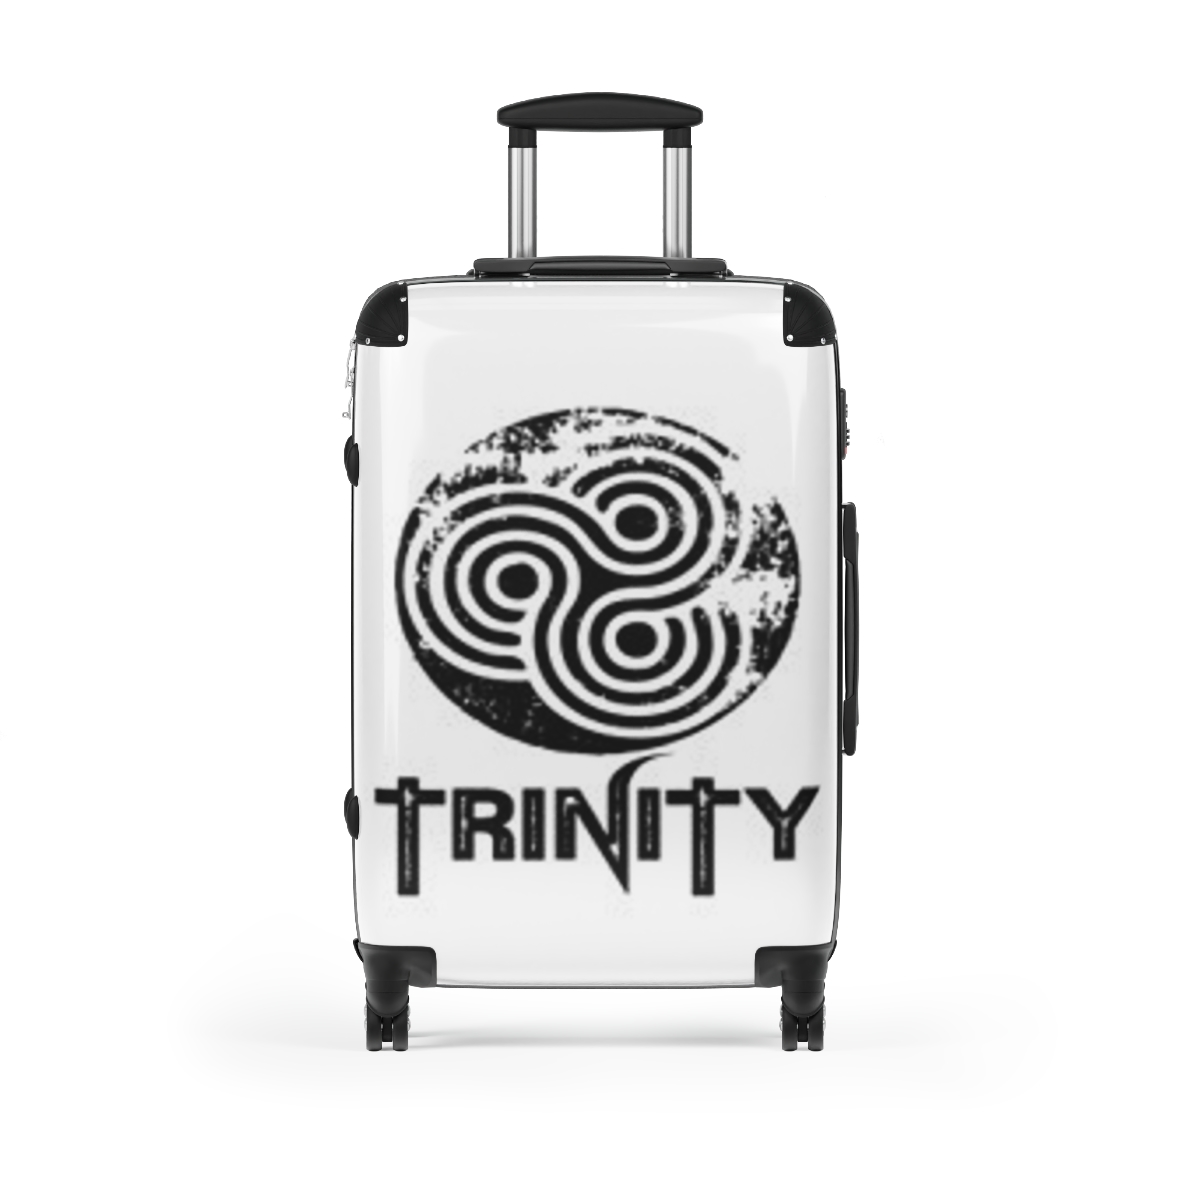 Trinity Cymbals Tour Suitcase product main image